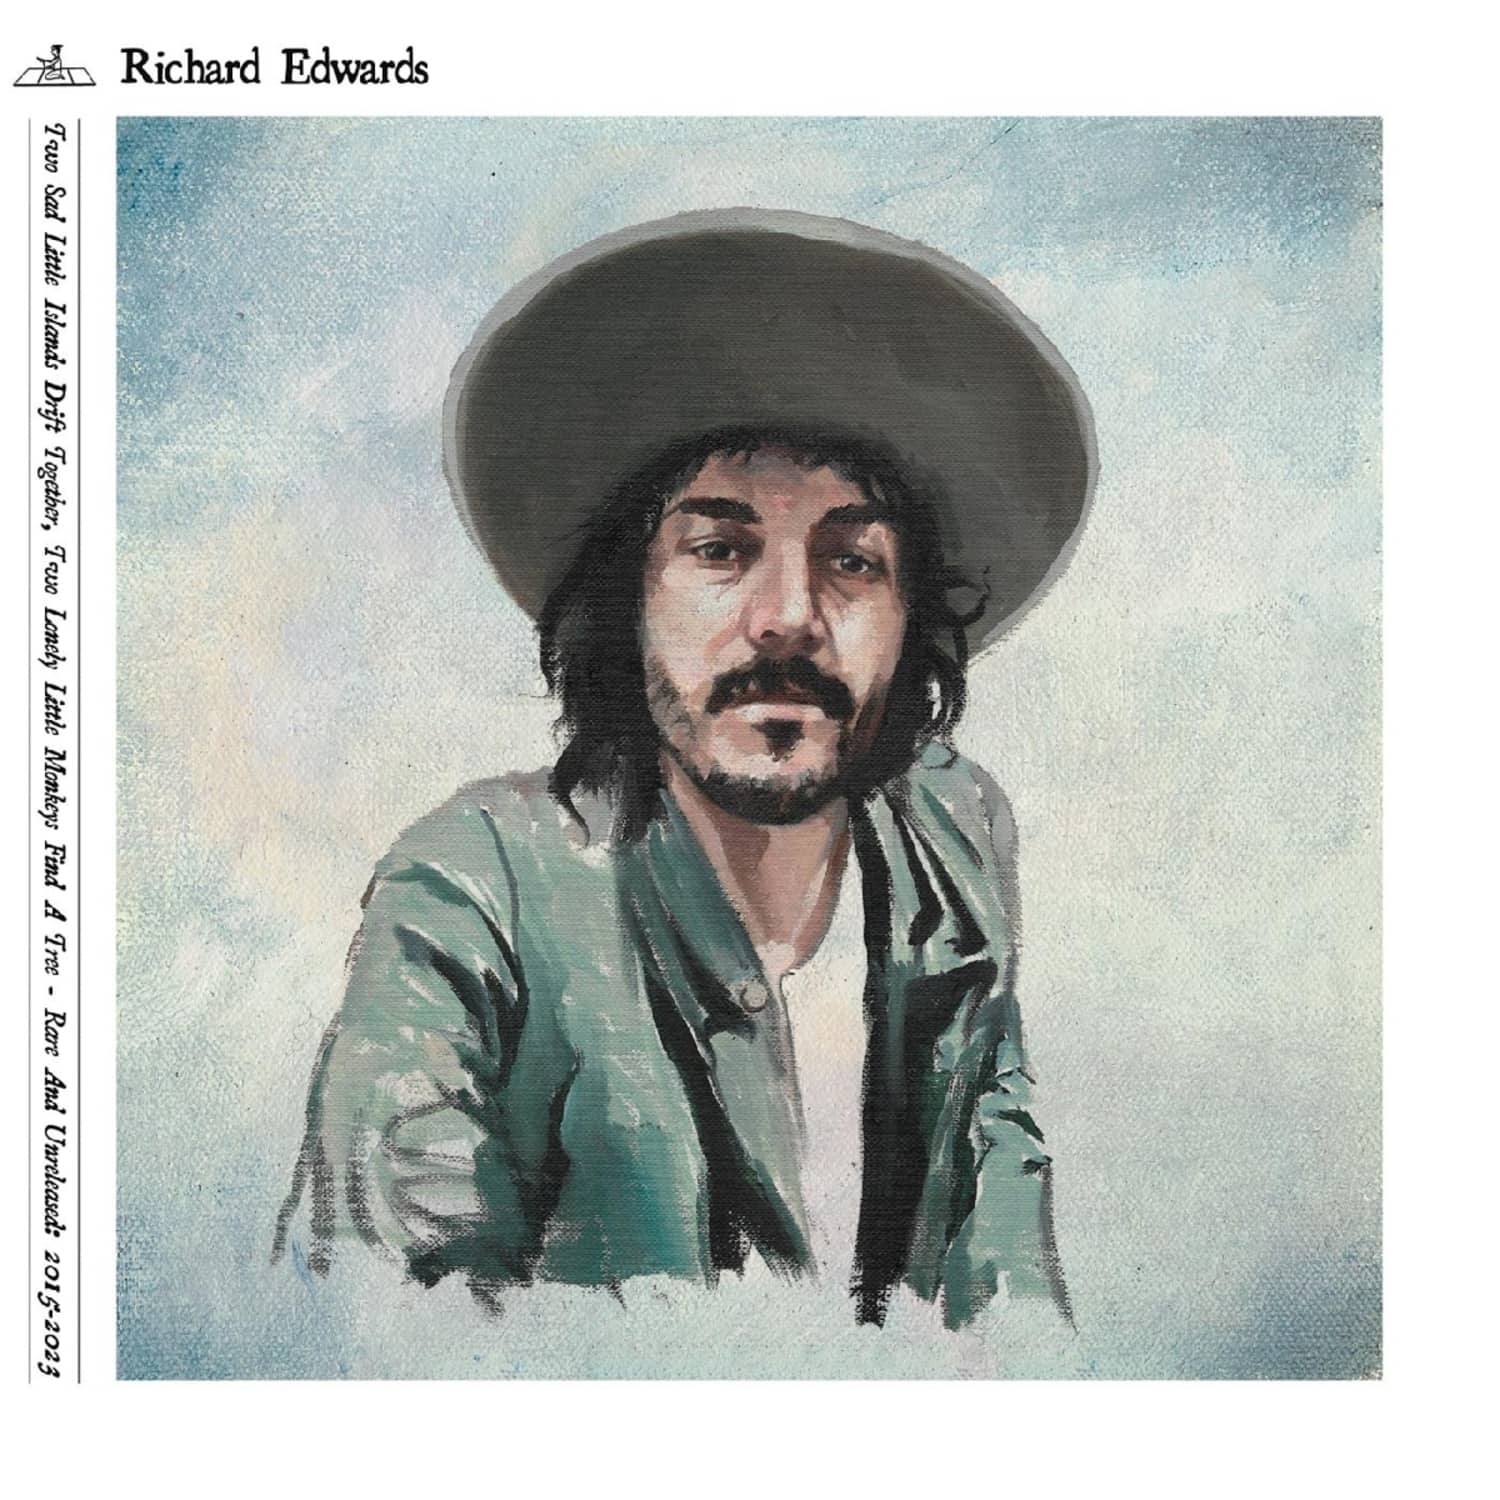 Richard Edwards - TWO SAD LITTLE ISLANDS DRIFT TOGETHER, TWO LONELY 